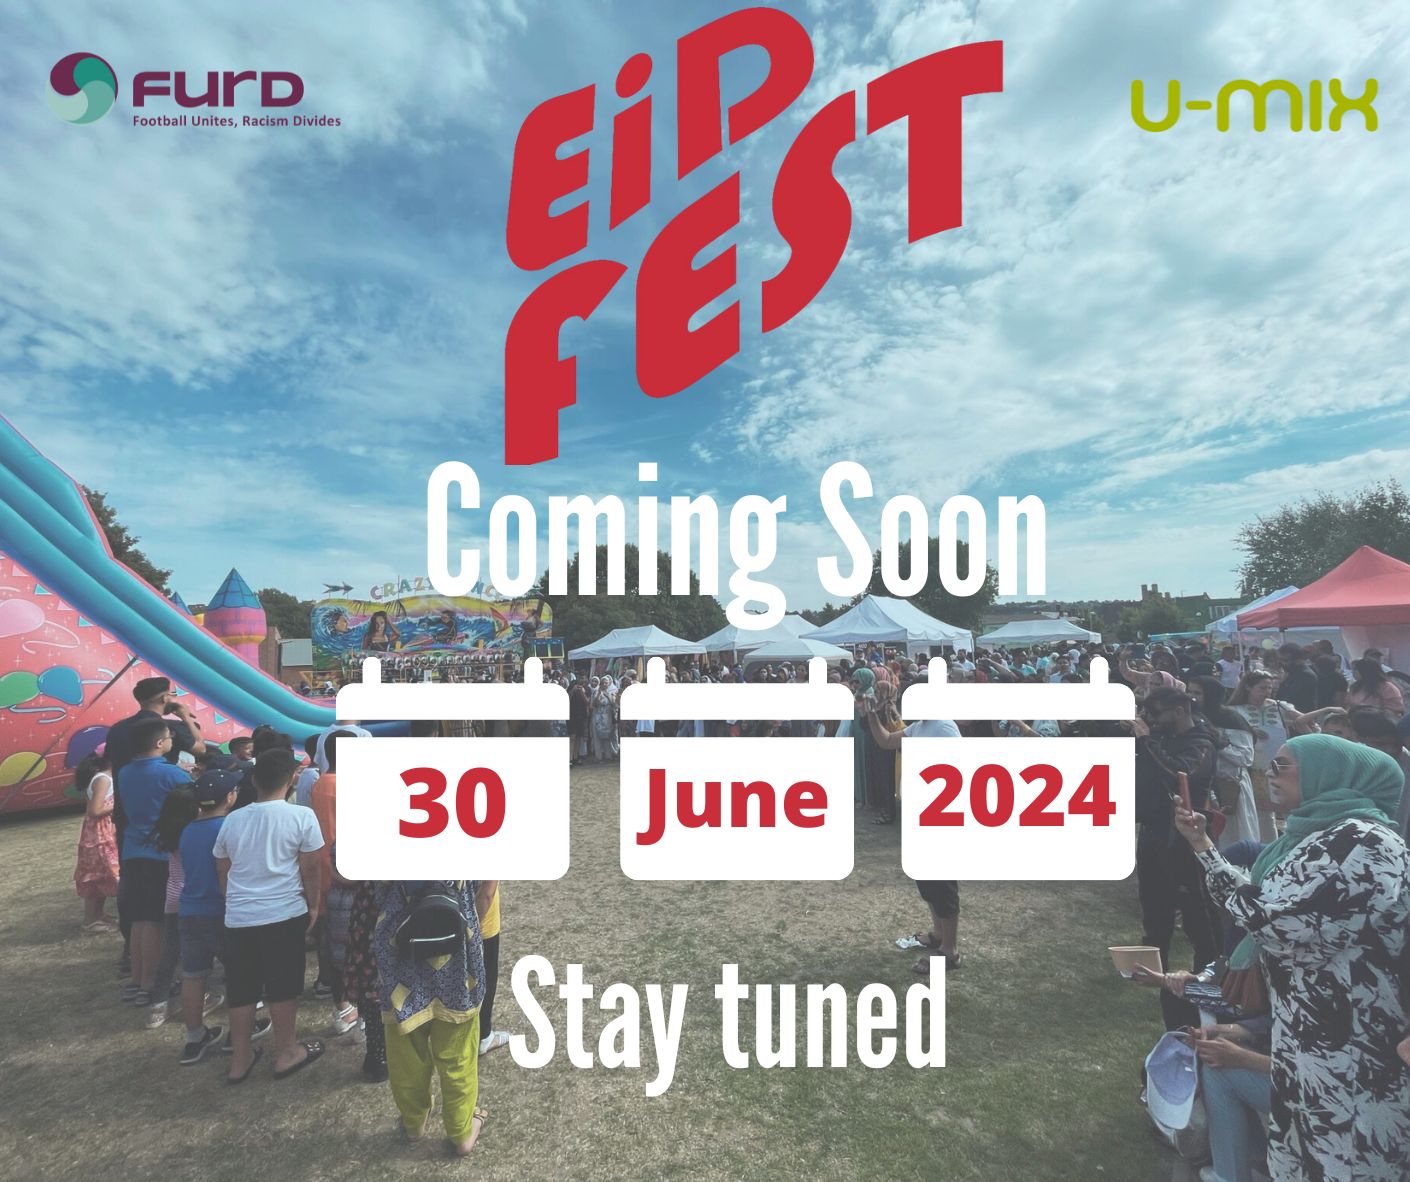 Eid festival 2024 save the date - Eid festival 2024 save the date flyer.